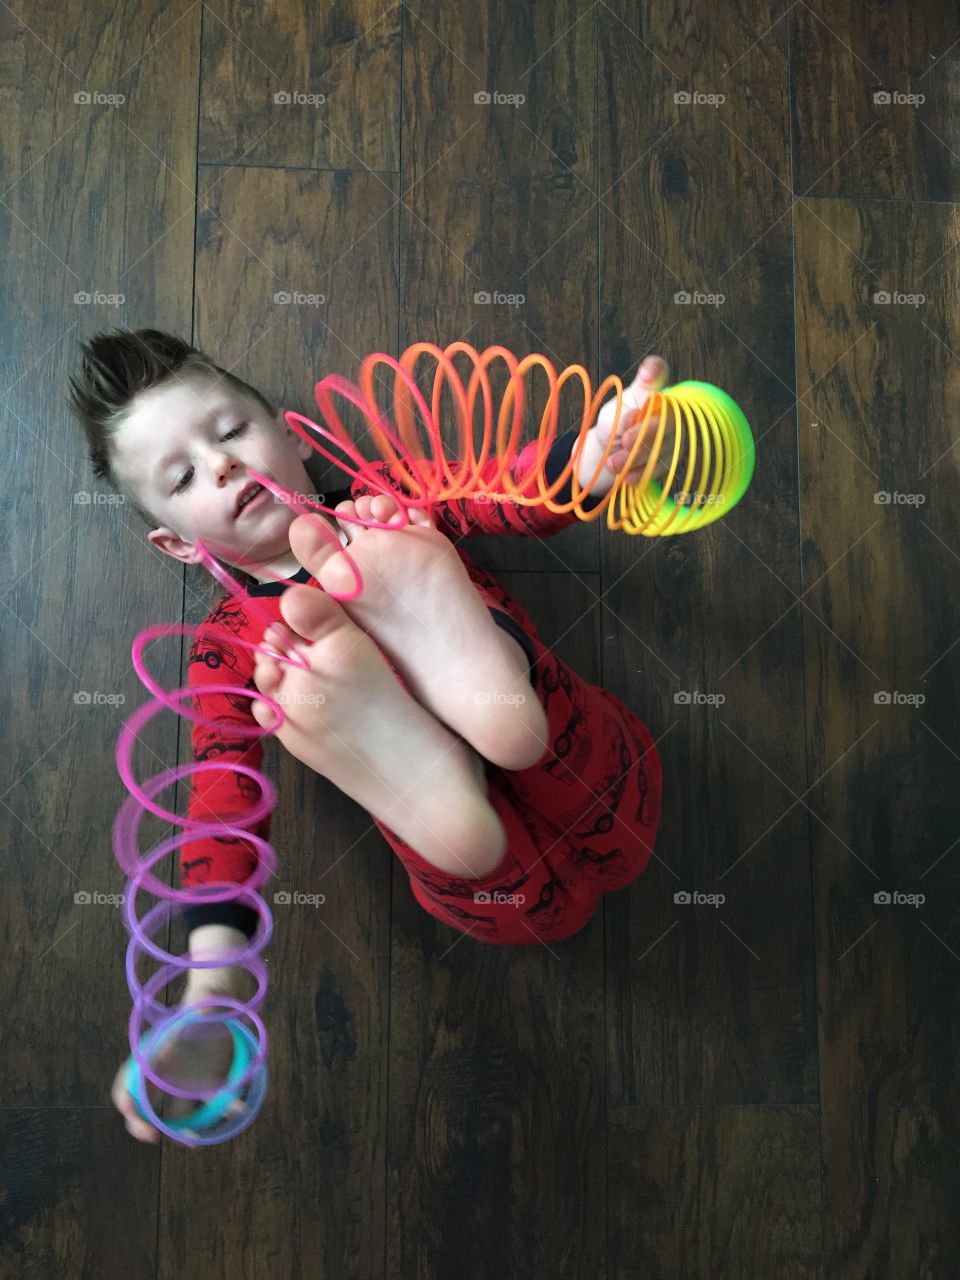 Boy playing with slinky